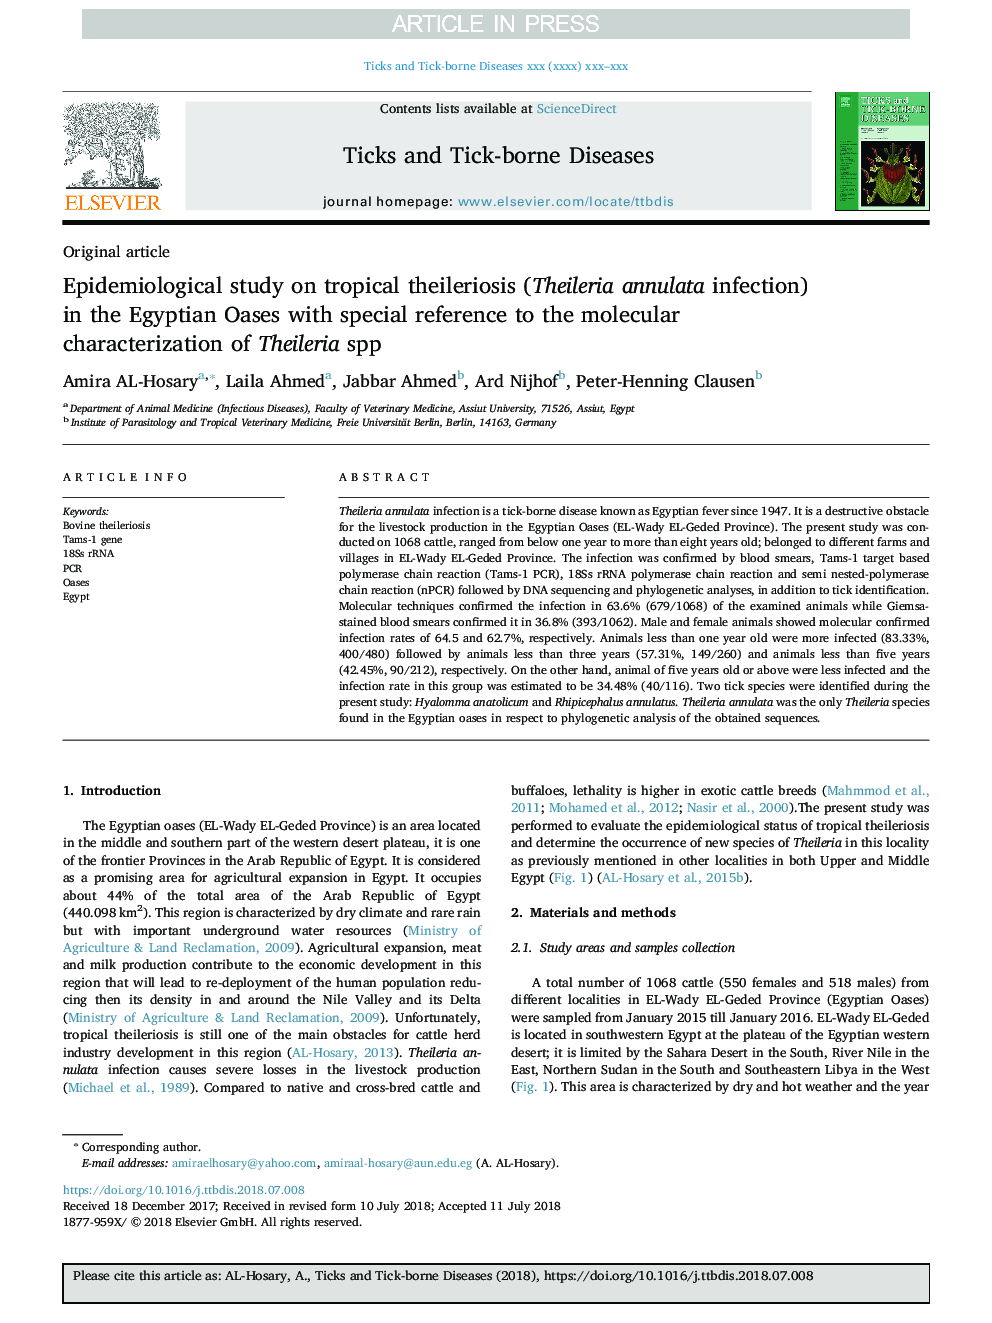 Epidemiological study on tropical theileriosis (Theileria annulata infection) in the Egyptian Oases with special reference to the molecular characterization of Theileria spp